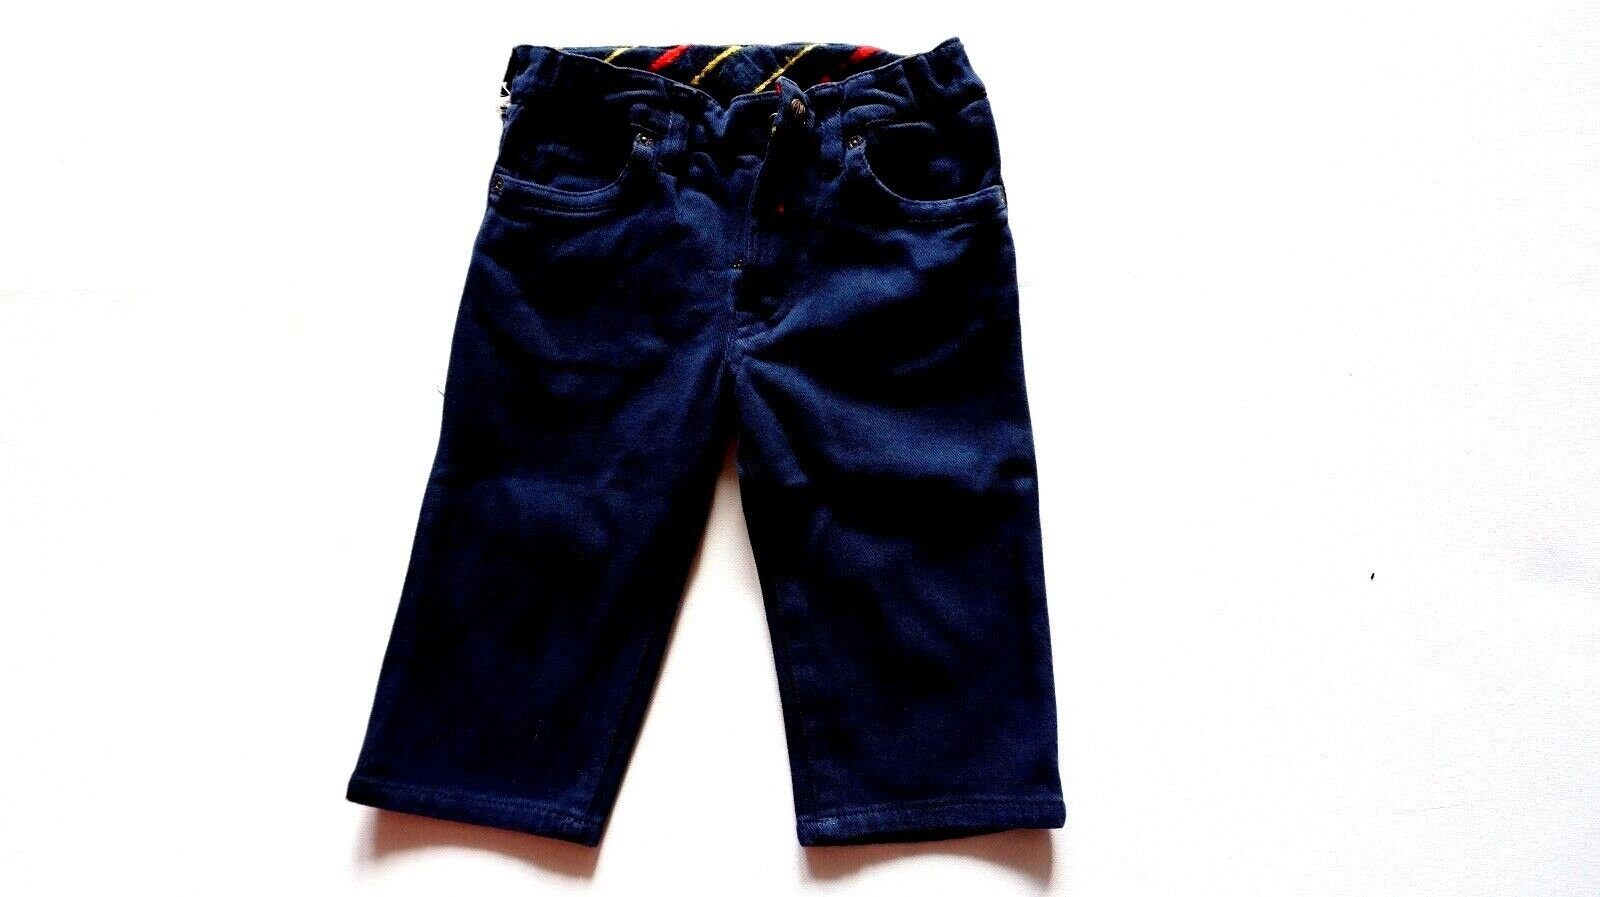 REPLAY Kinder & 5-Pocket-Jeans Replay SONS Kinder Jeans, Jungen Hose Jeans Replay Jeans